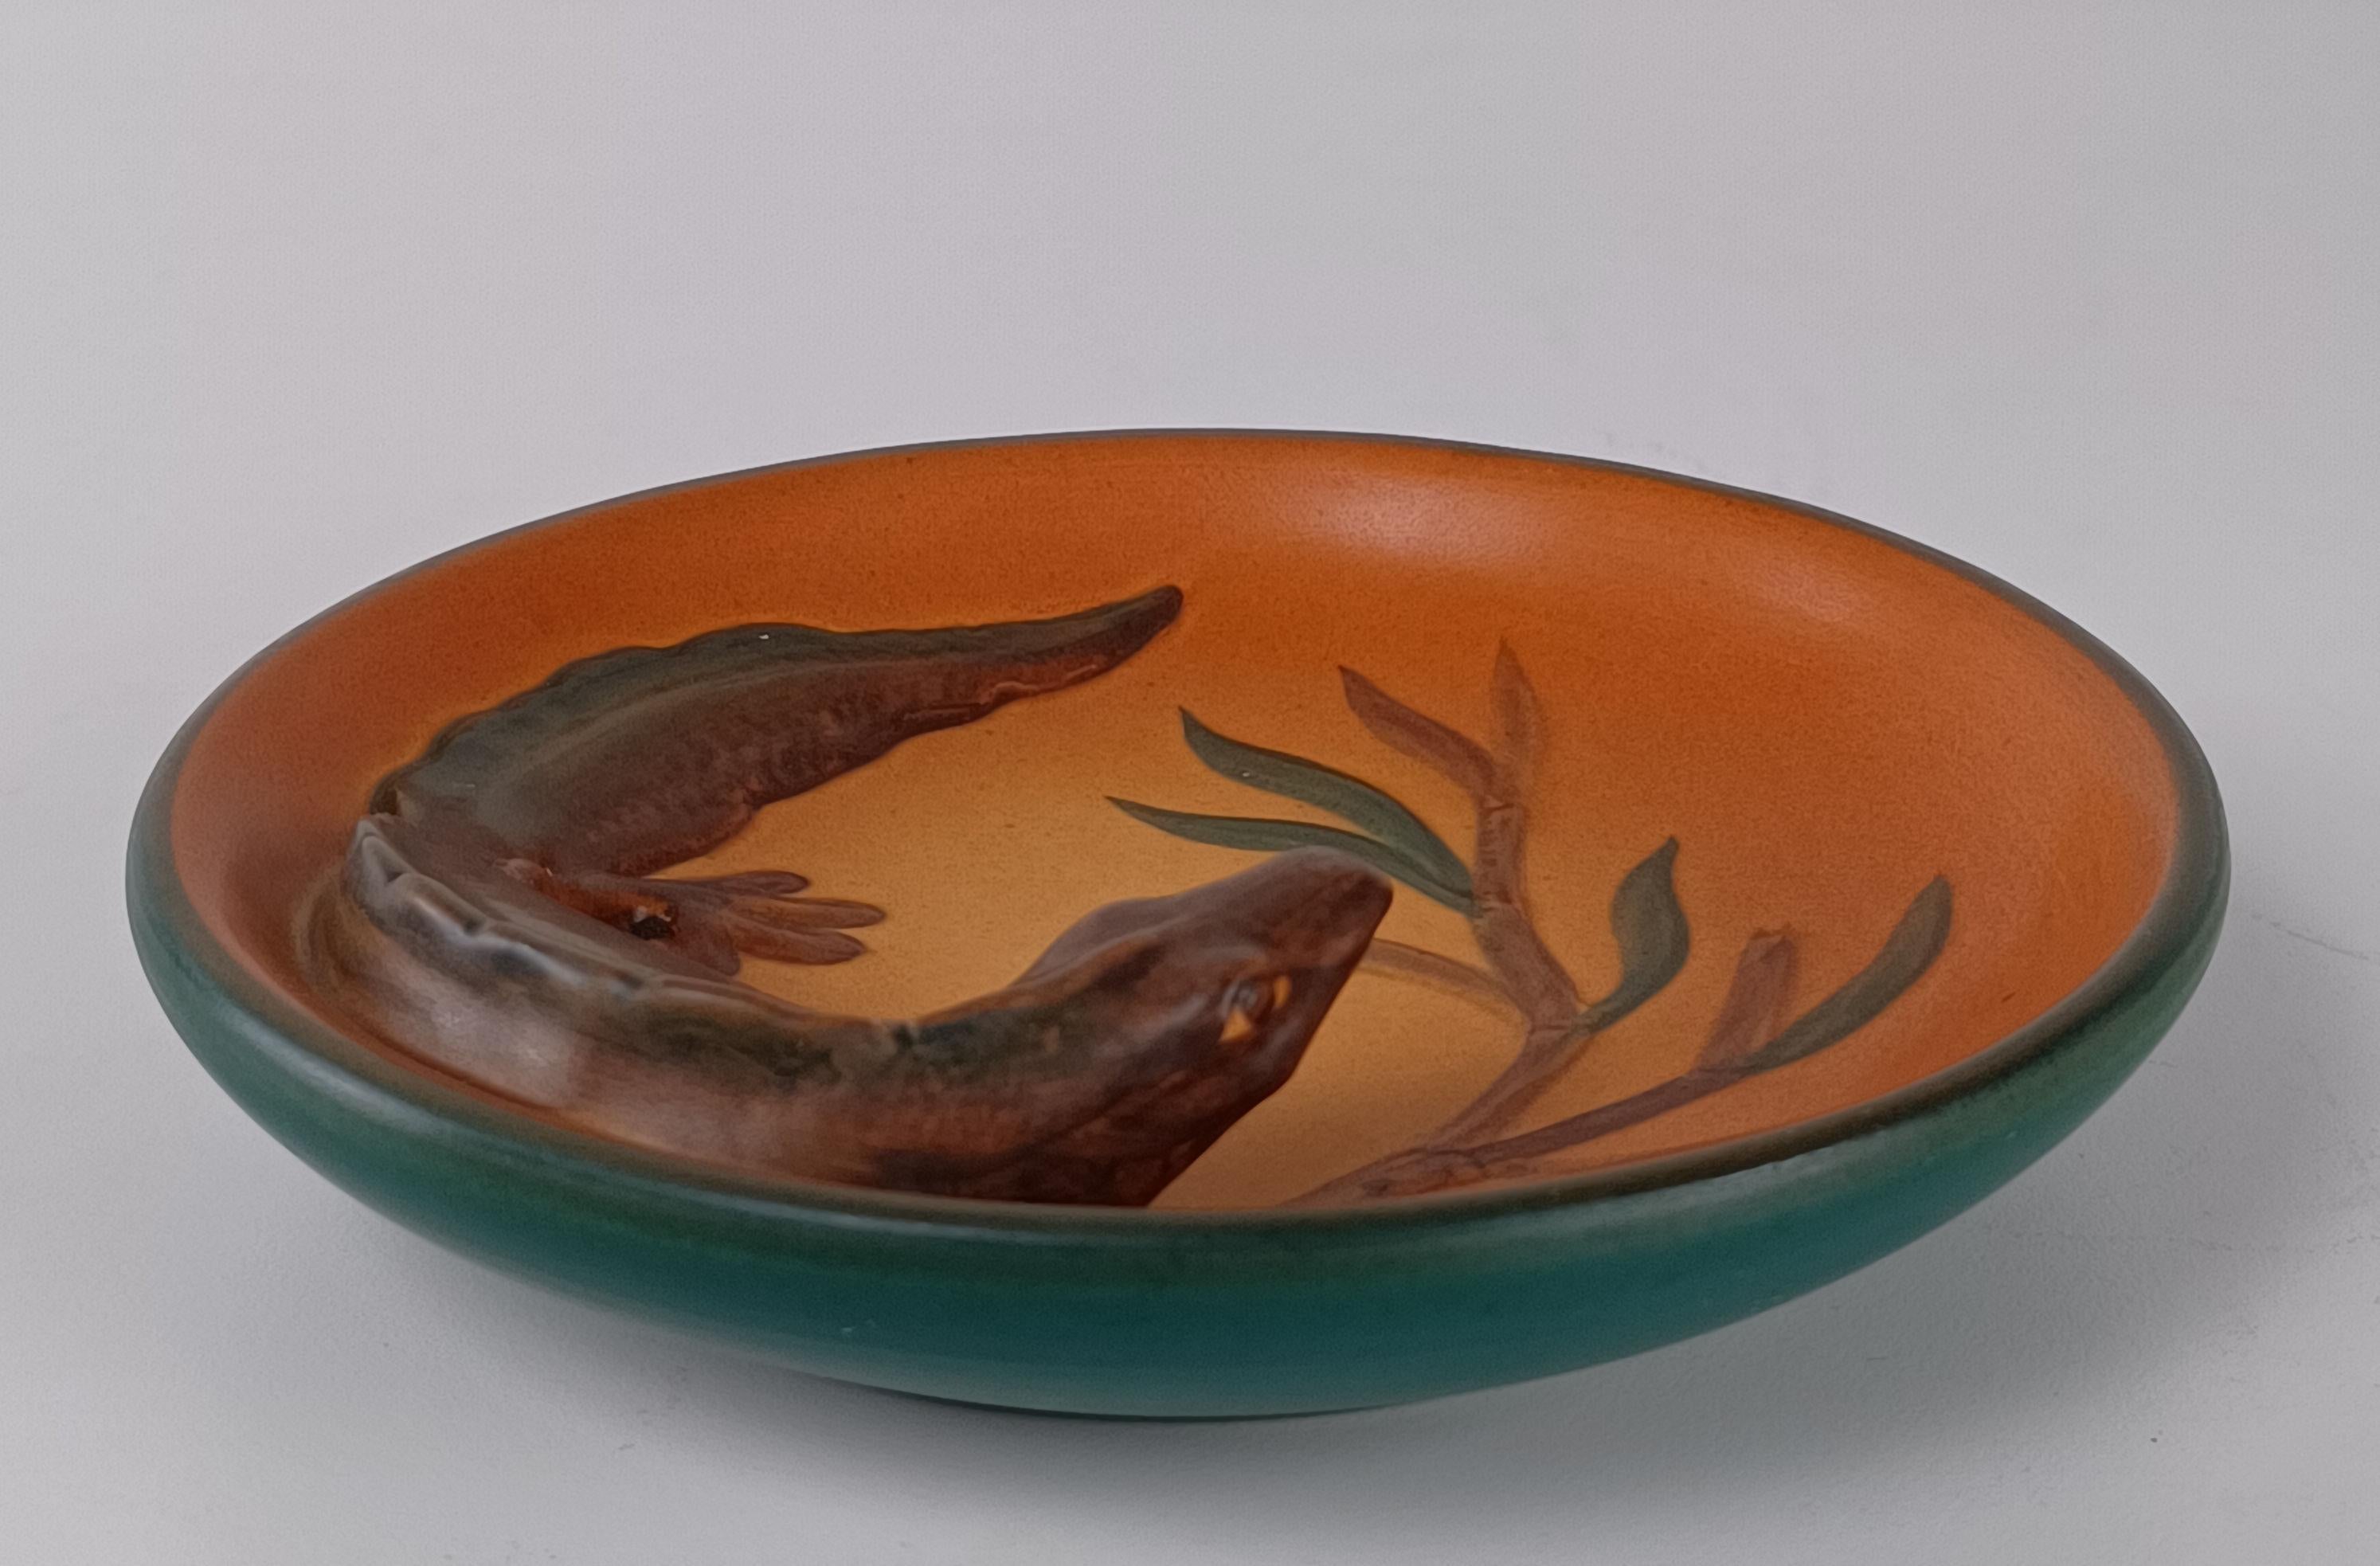 Hand-Crafted 1920's Danish Art Nouveau Handcrafted Fish and Salamander Bowls by Ipsens Enke For Sale